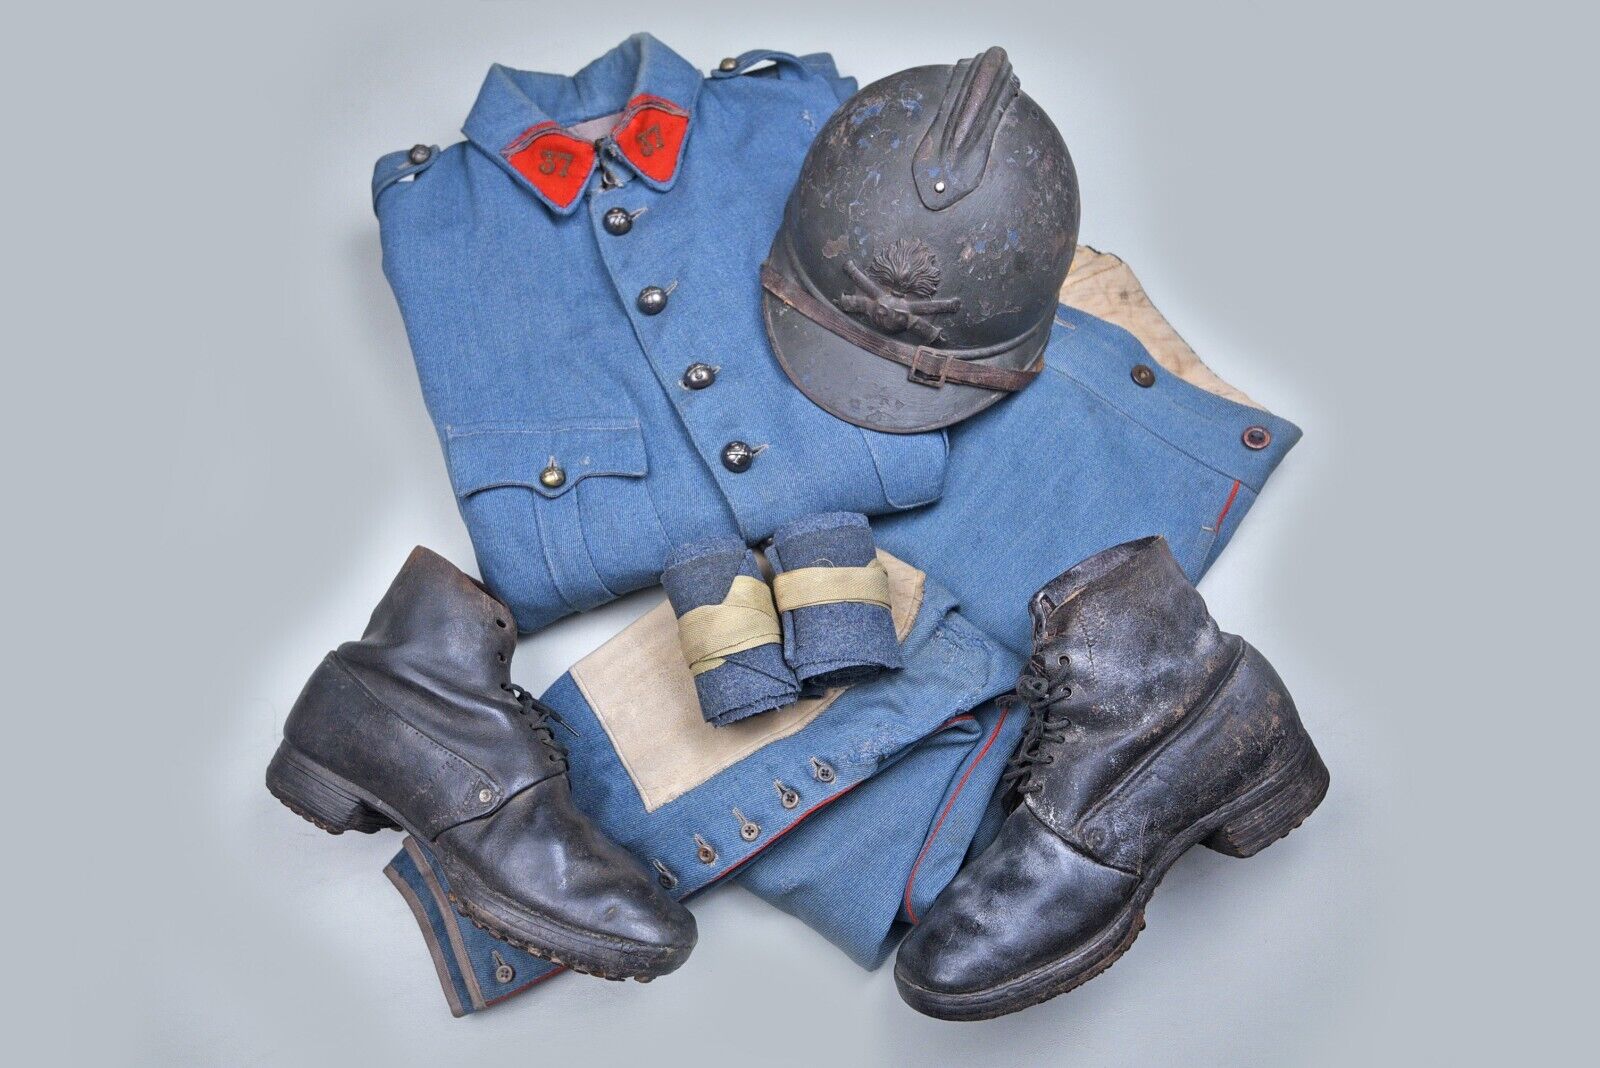 WWI FRENCH ARTILLERY UNIFORM JACKET, TROUSERS, PUTTIES, BOOTS, & HELMET GROUP